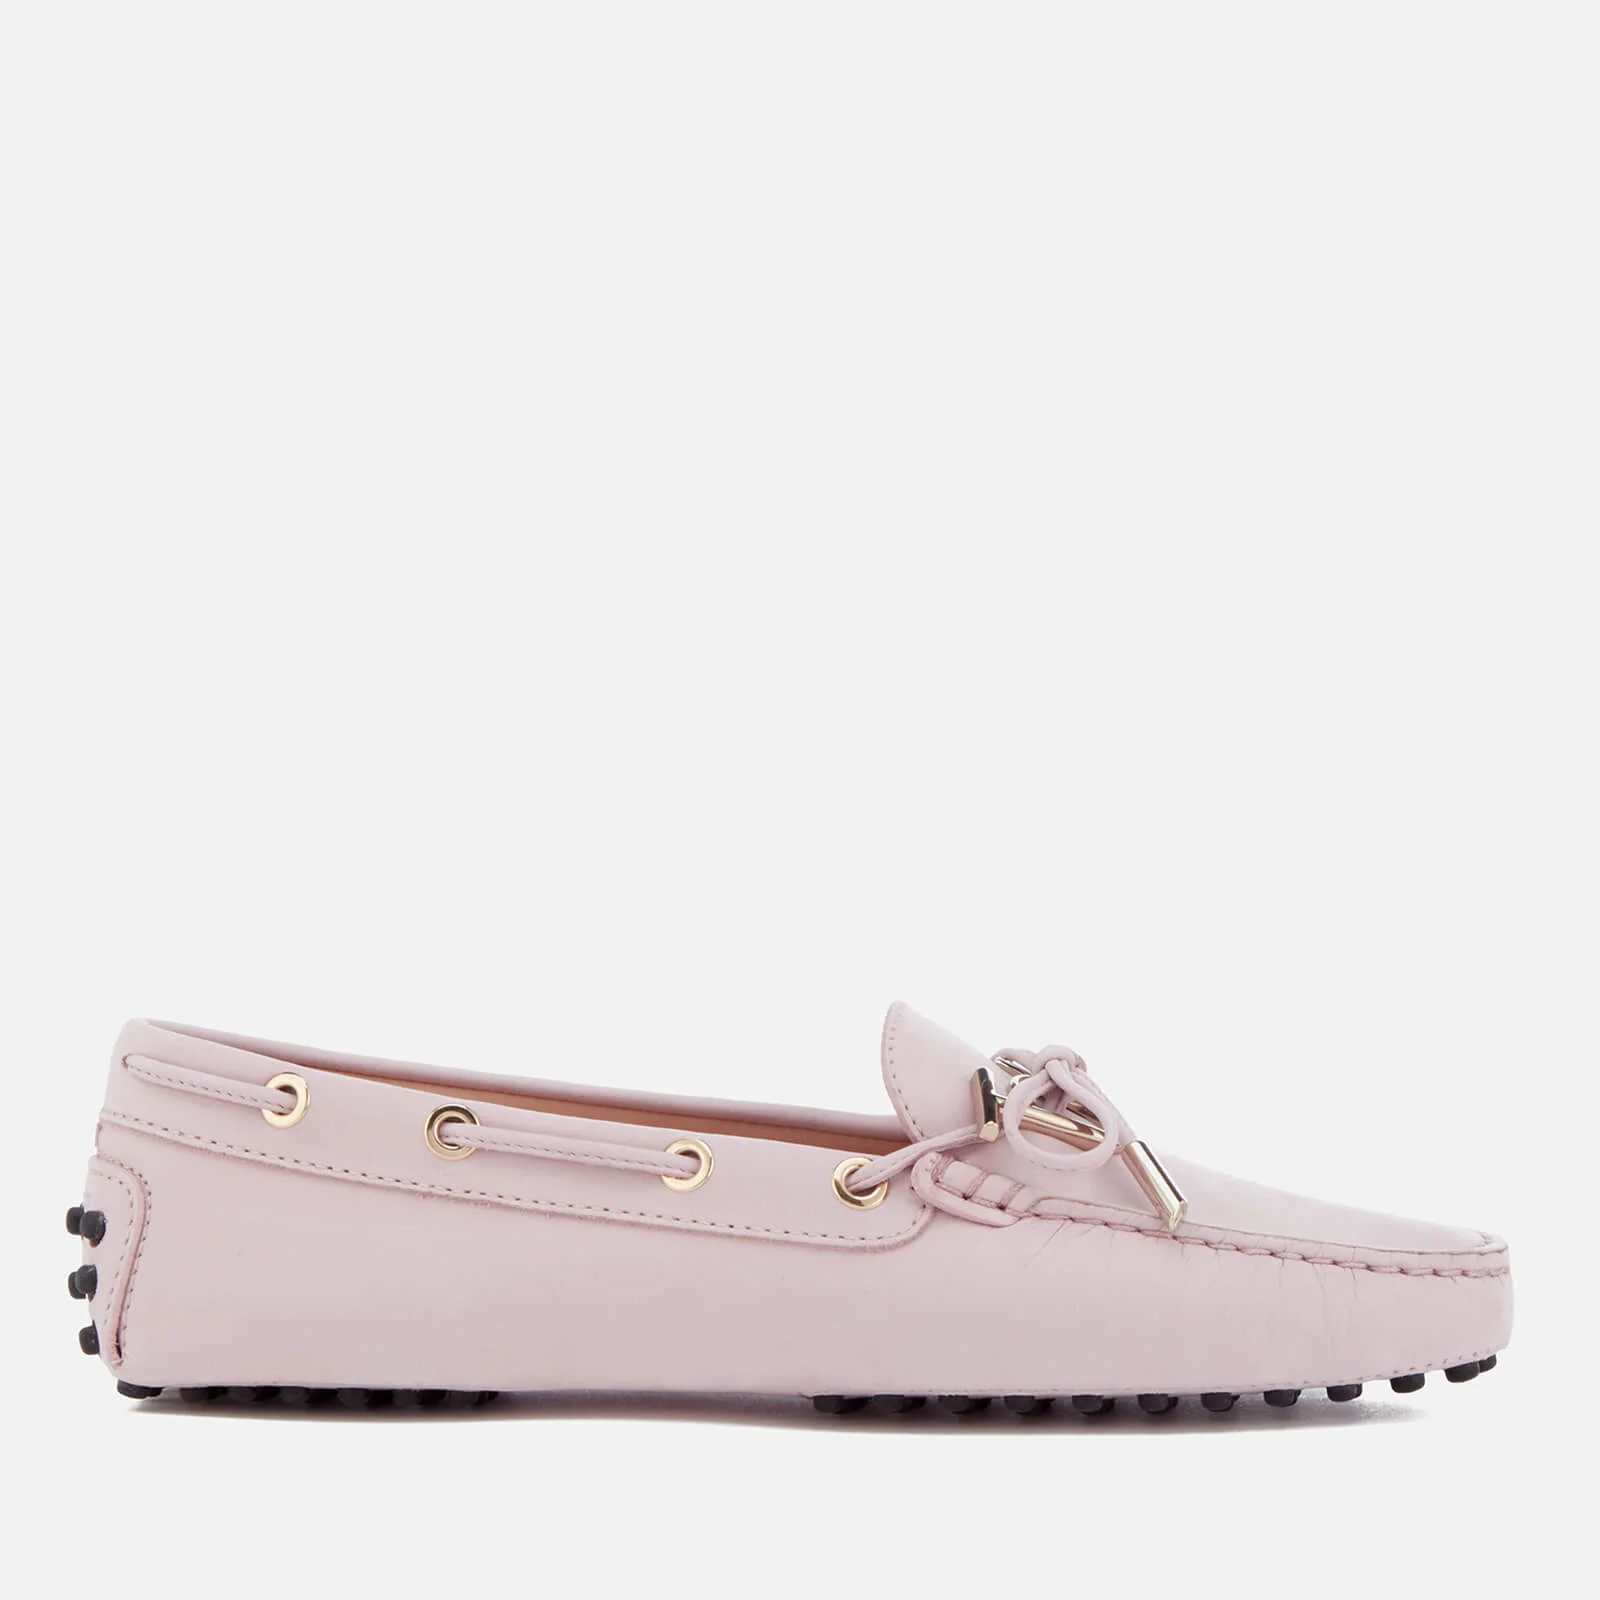 Tod's Women's Suede Gommino Heaven Logo Loafers - Light Pink Image 1